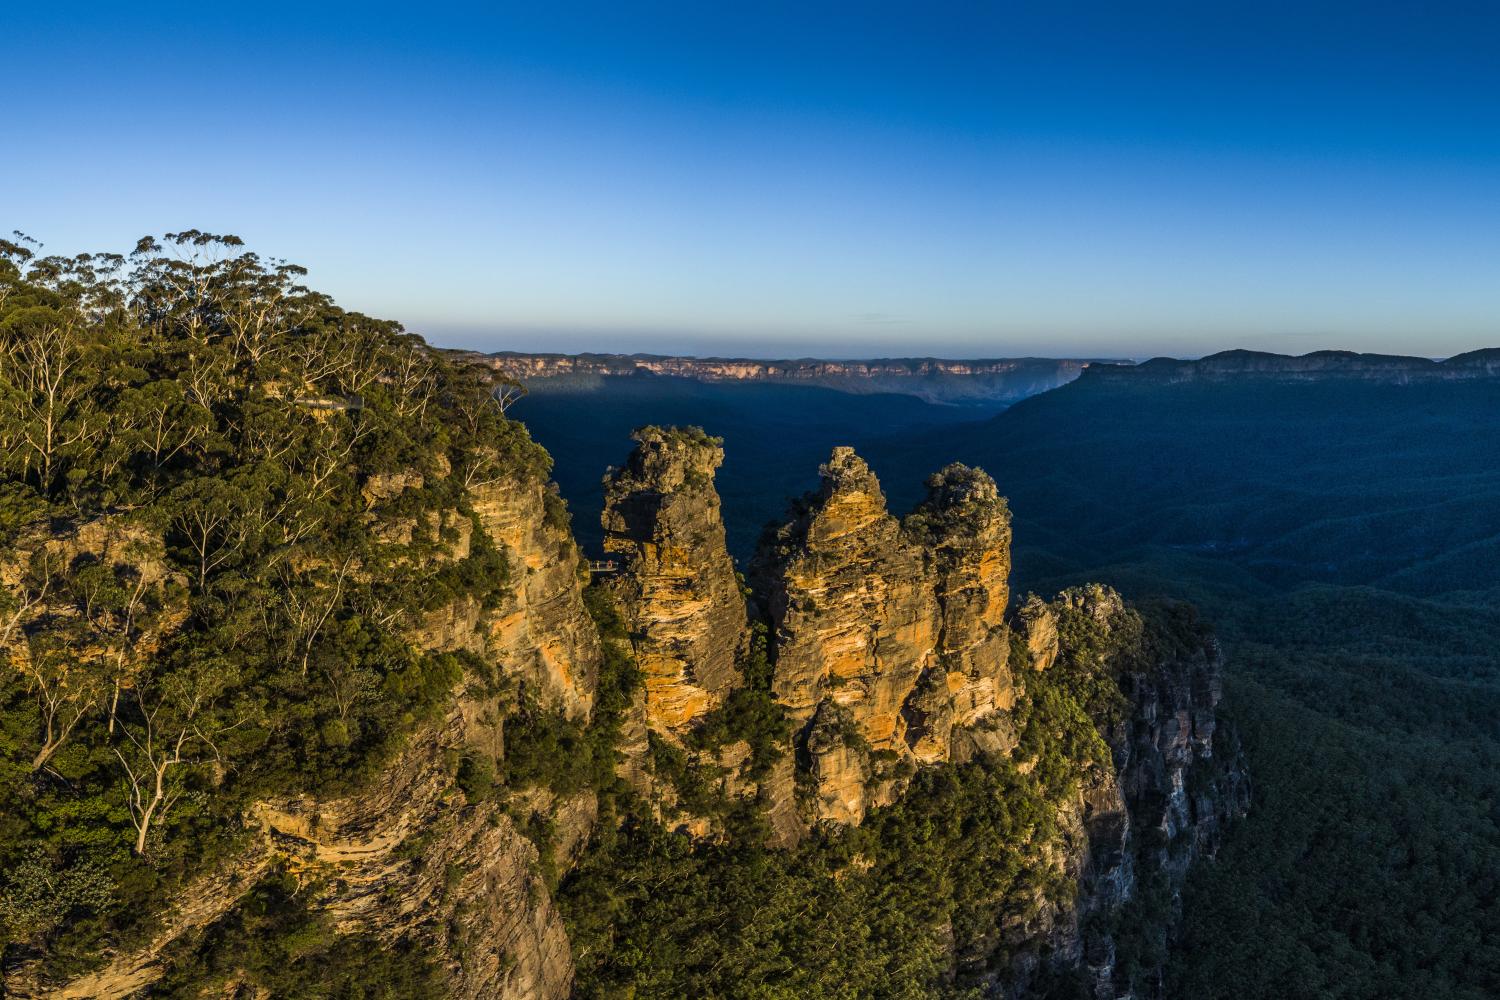 Sun setting over The Three Sisters, Katoomba in the Blue Mountains